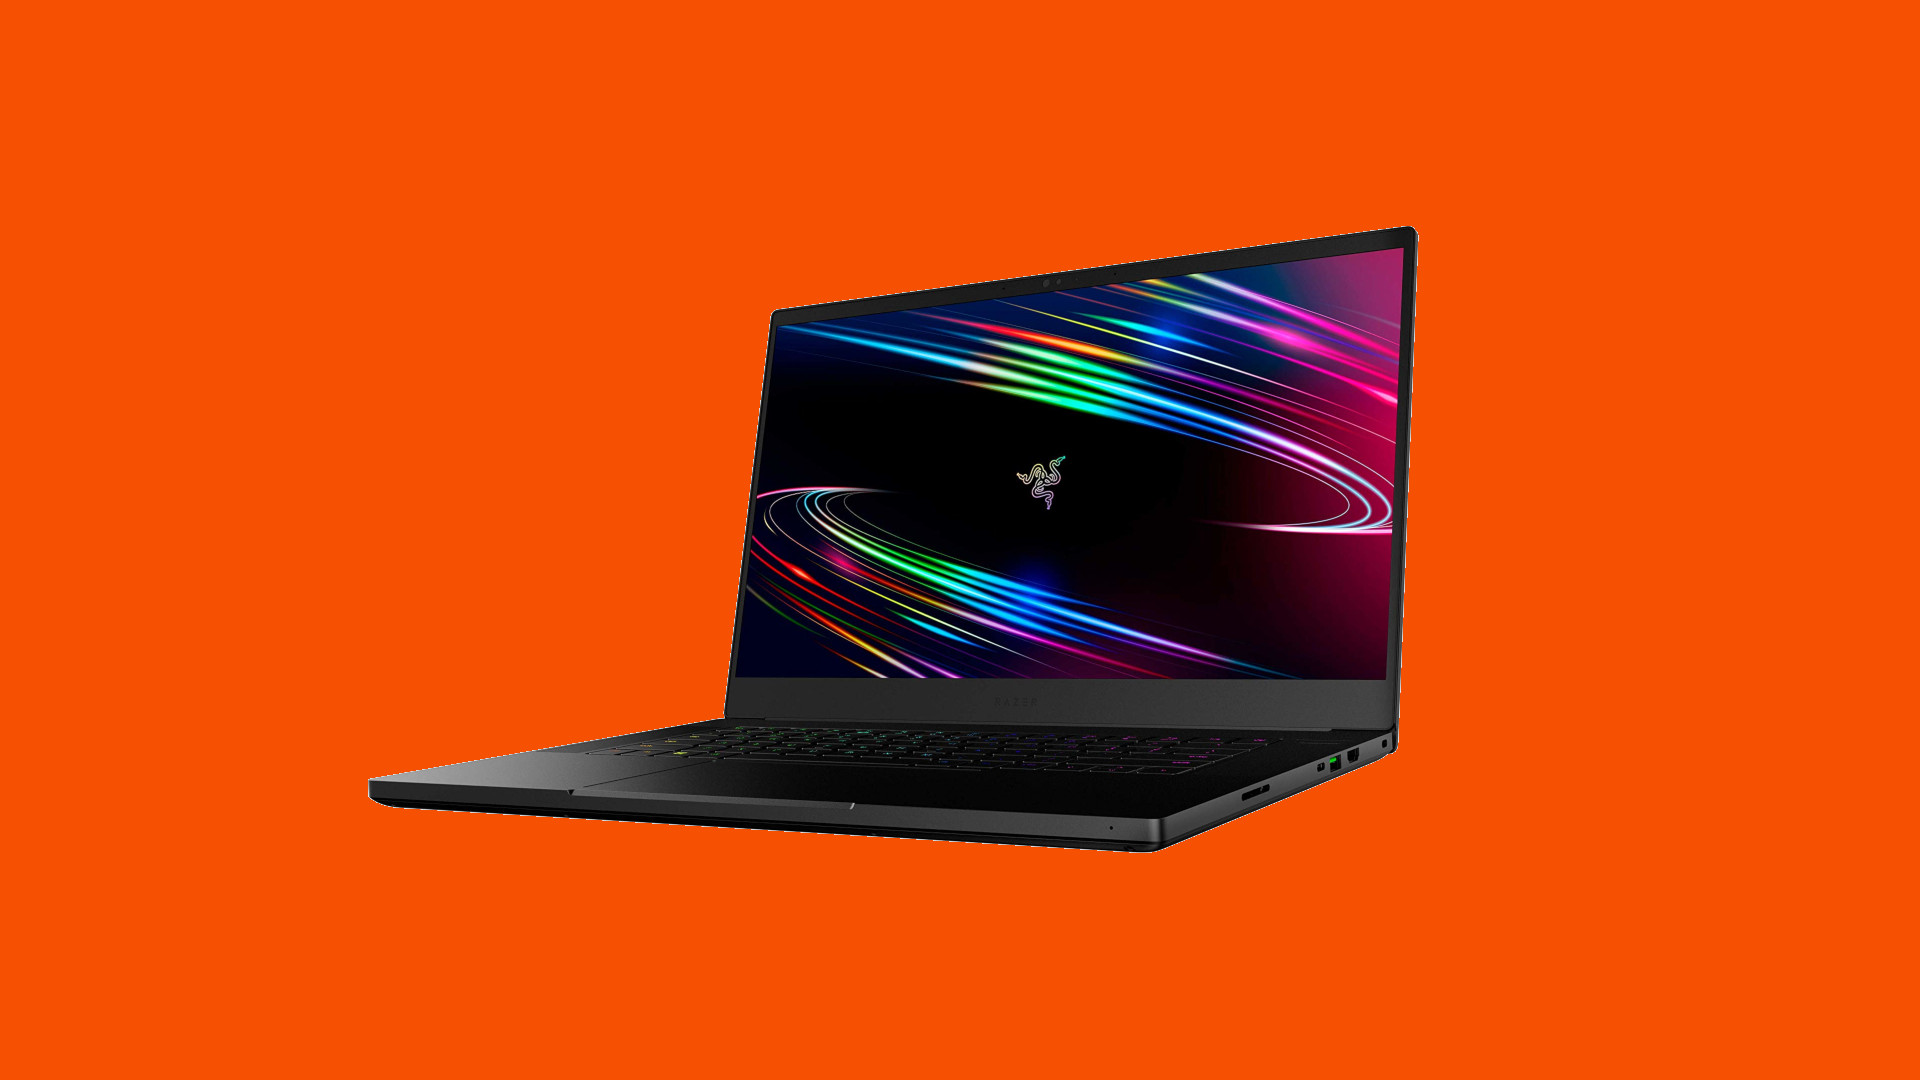 Grab a Razer Blade 15 at its lowest ever price in Prime Day deal